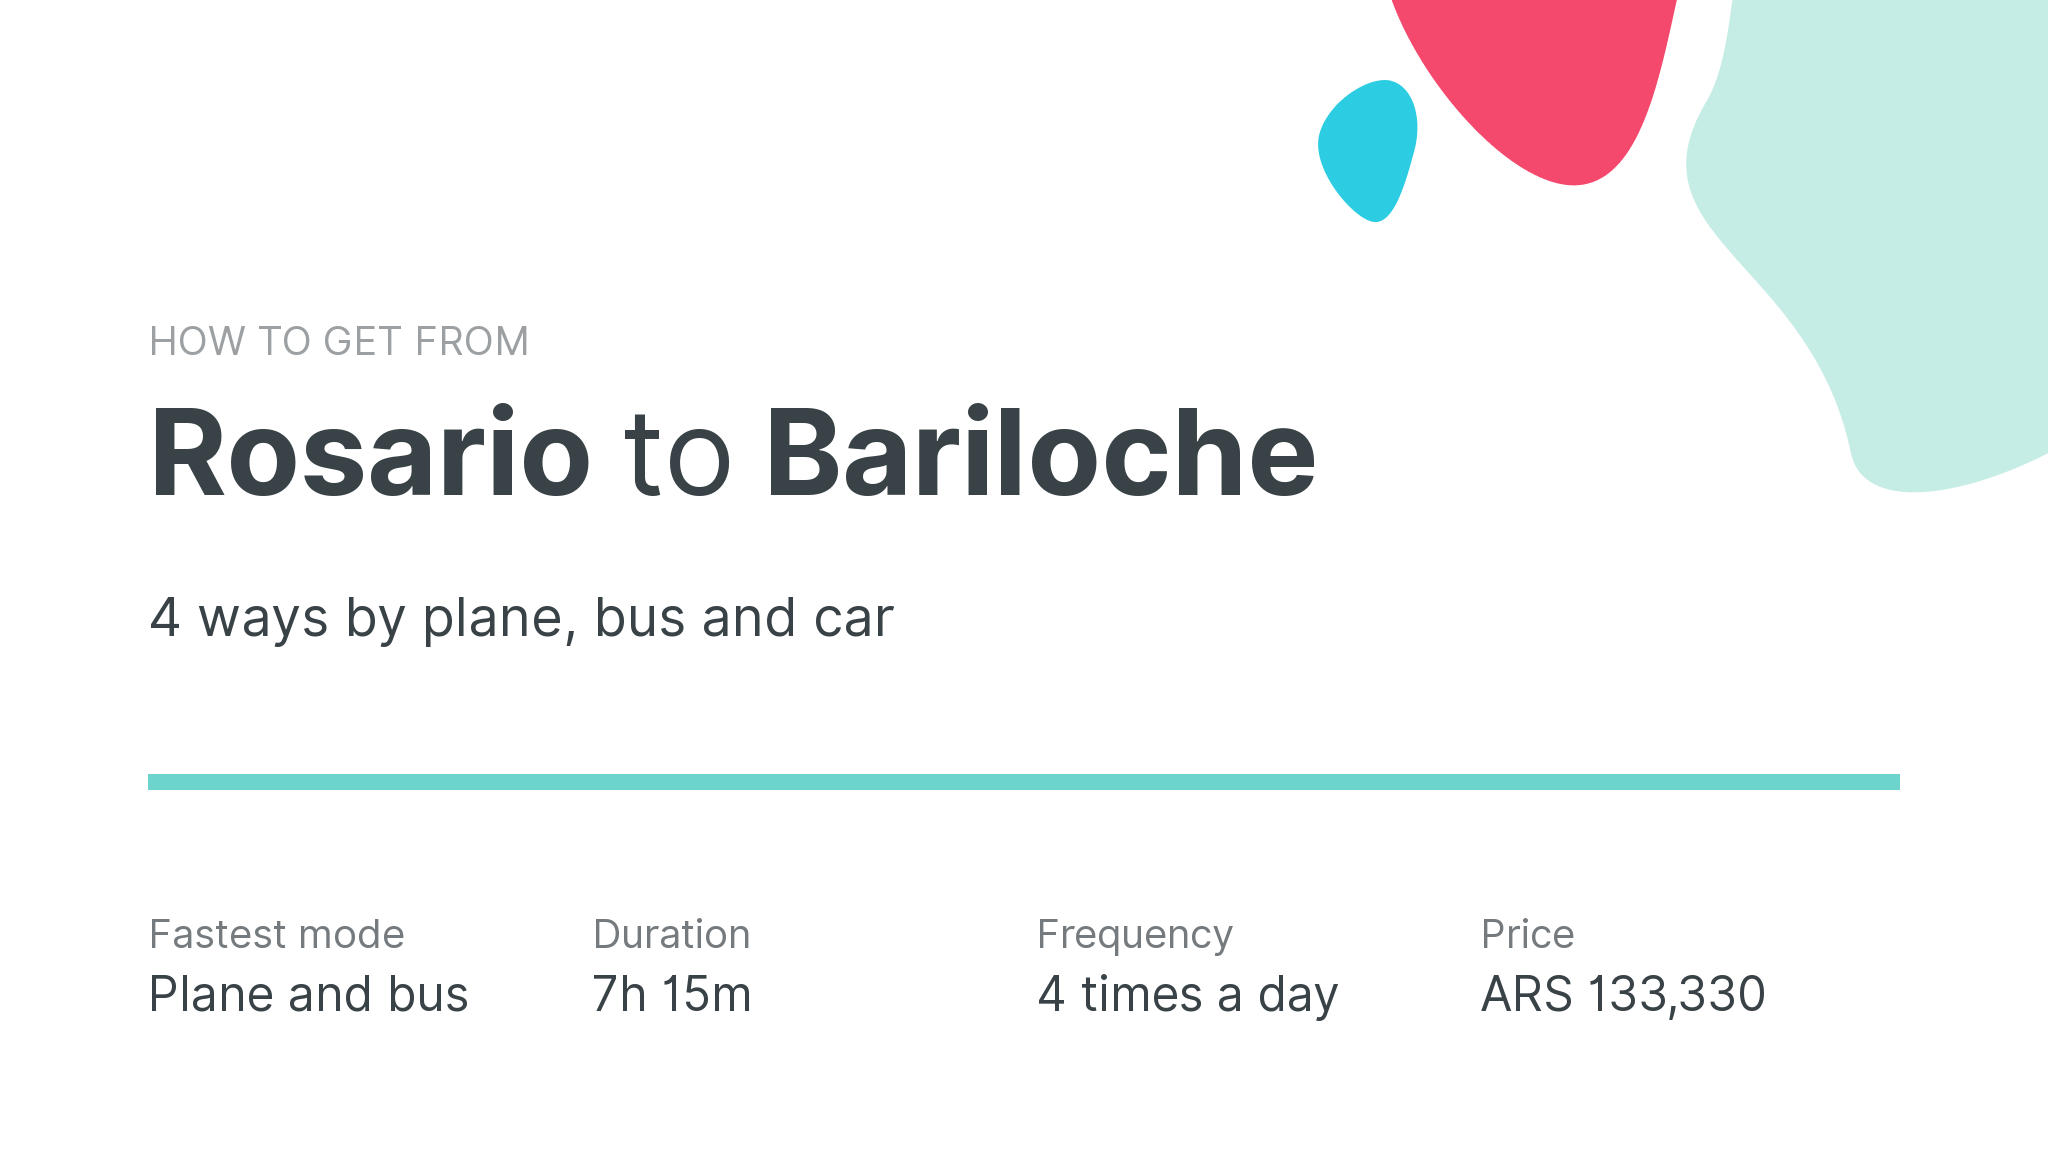 How do I get from Rosario to Bariloche